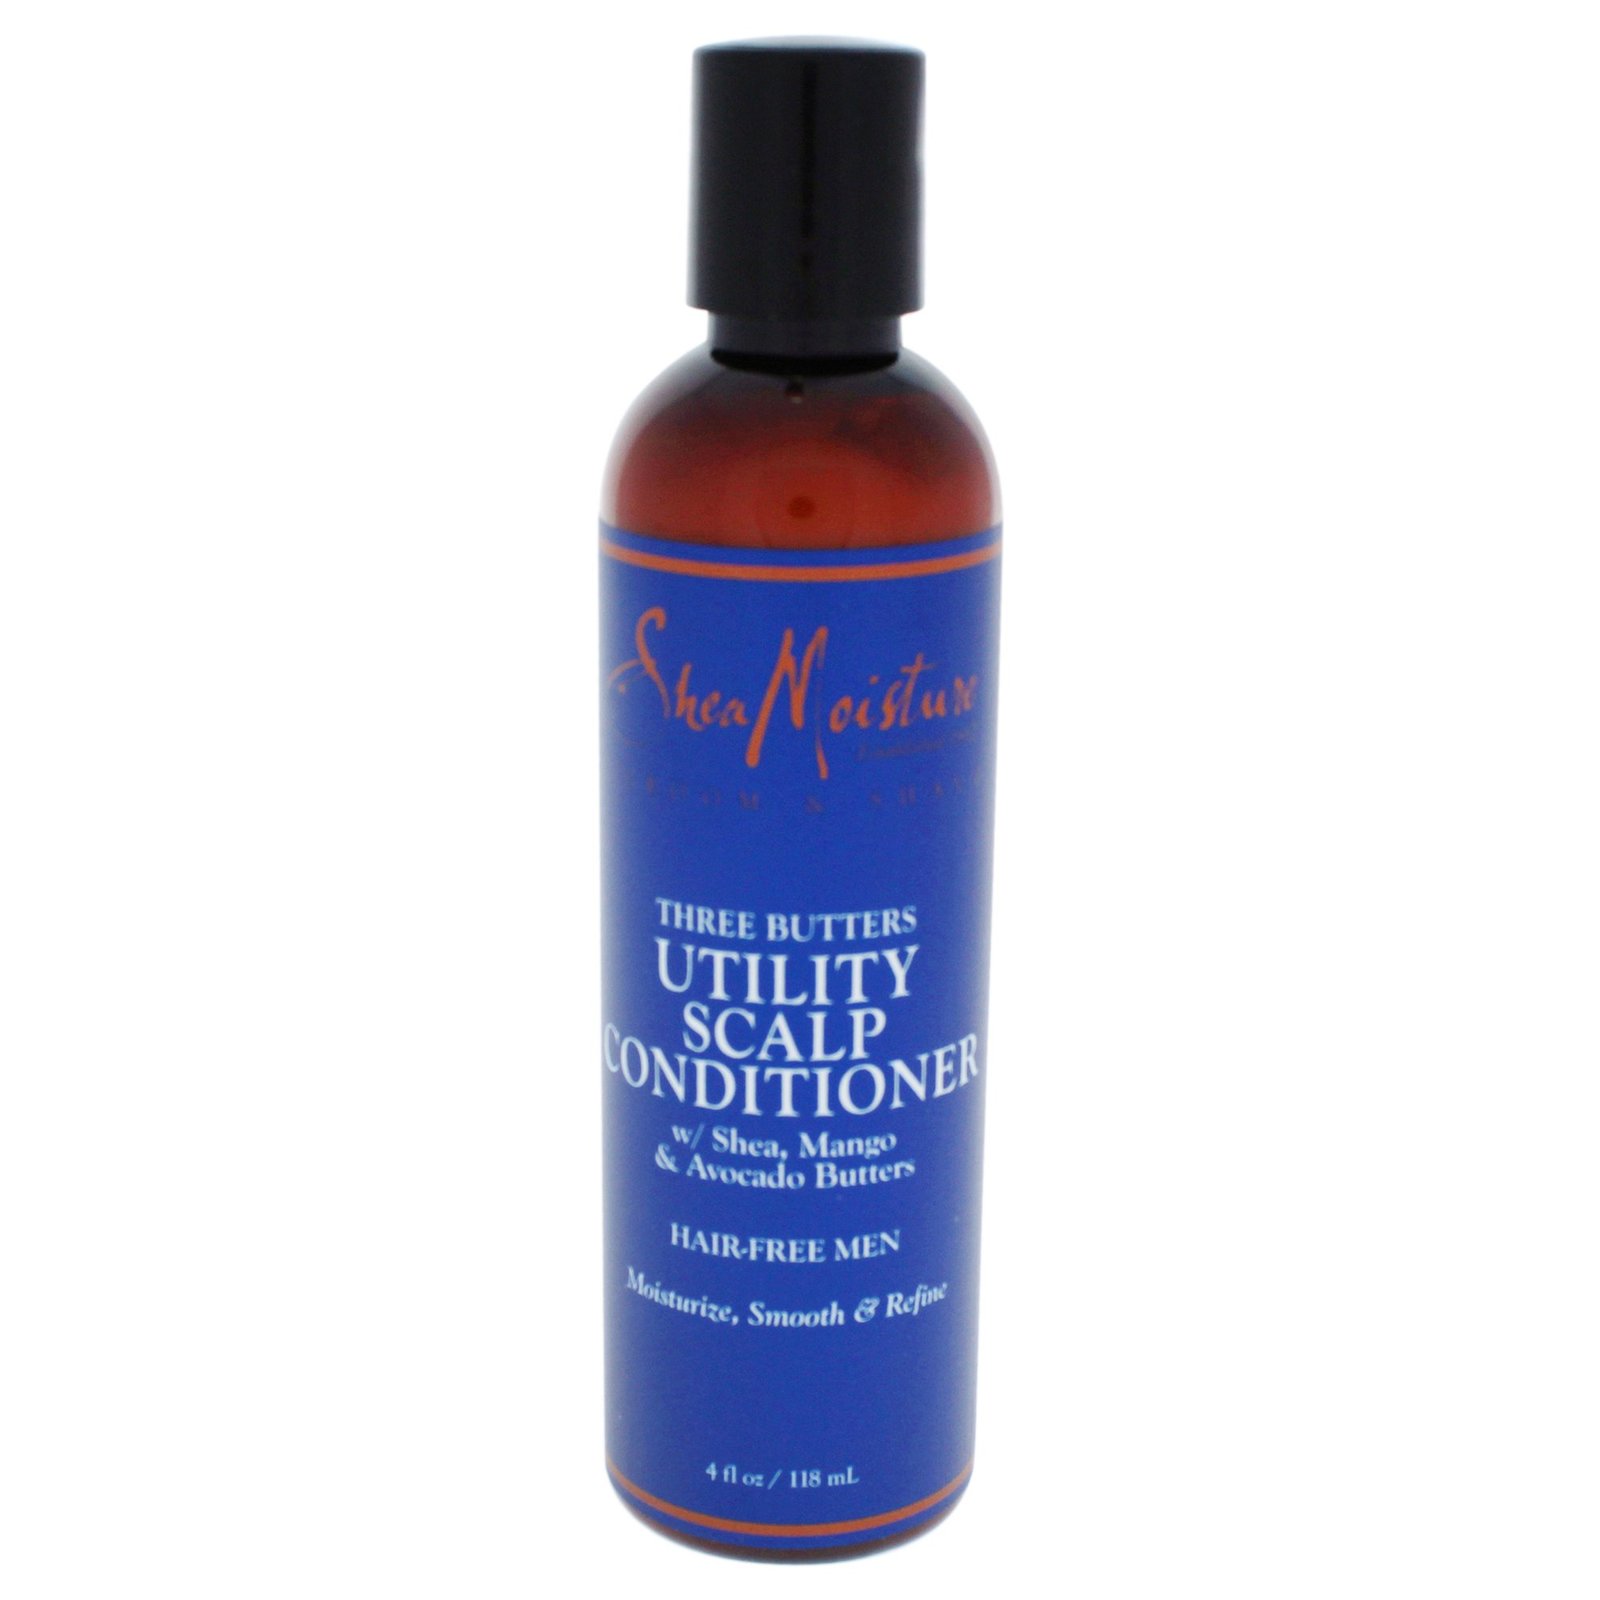 SheaMoisture Three Butters Utility Scalp Conditioner for Men, 4 Ounce - $34.30